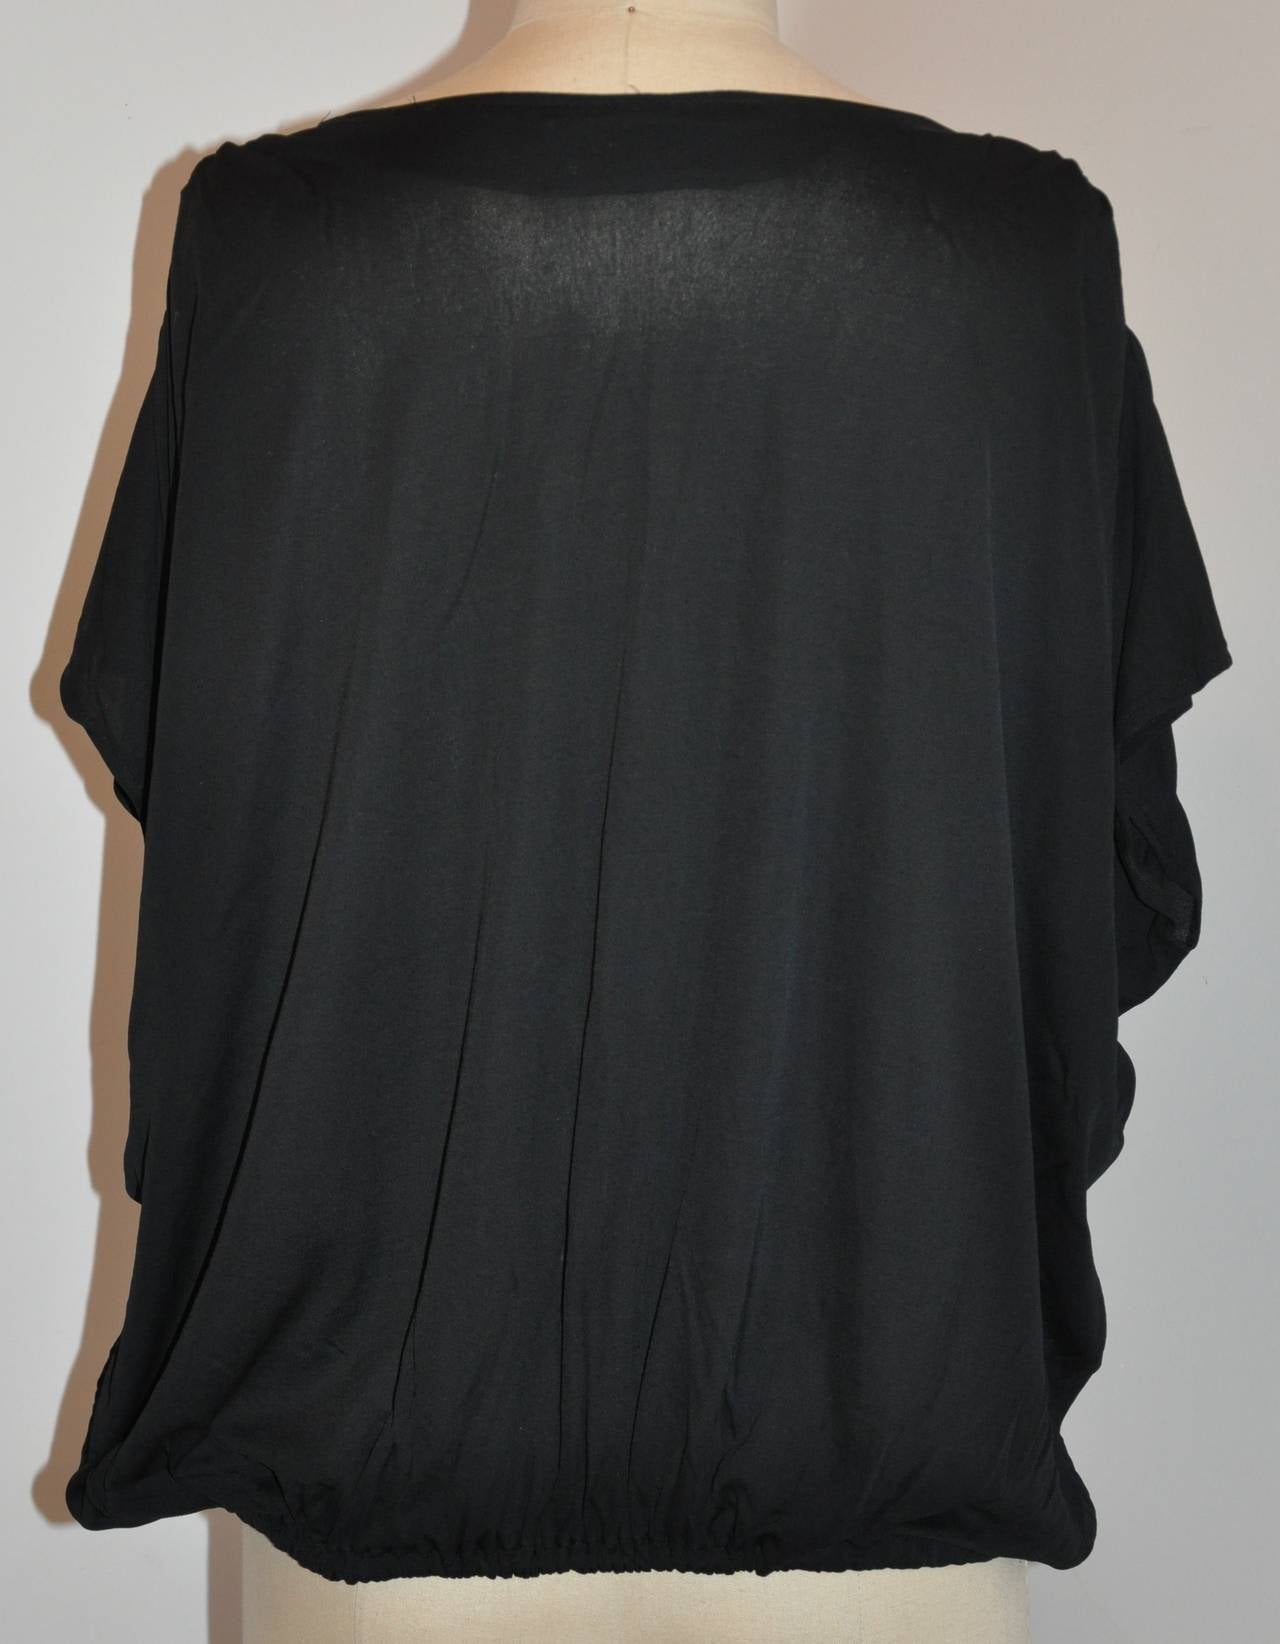 Colecchio Black Silk Jersey Boat-Neck Pullover In Good Condition For Sale In New York, NY